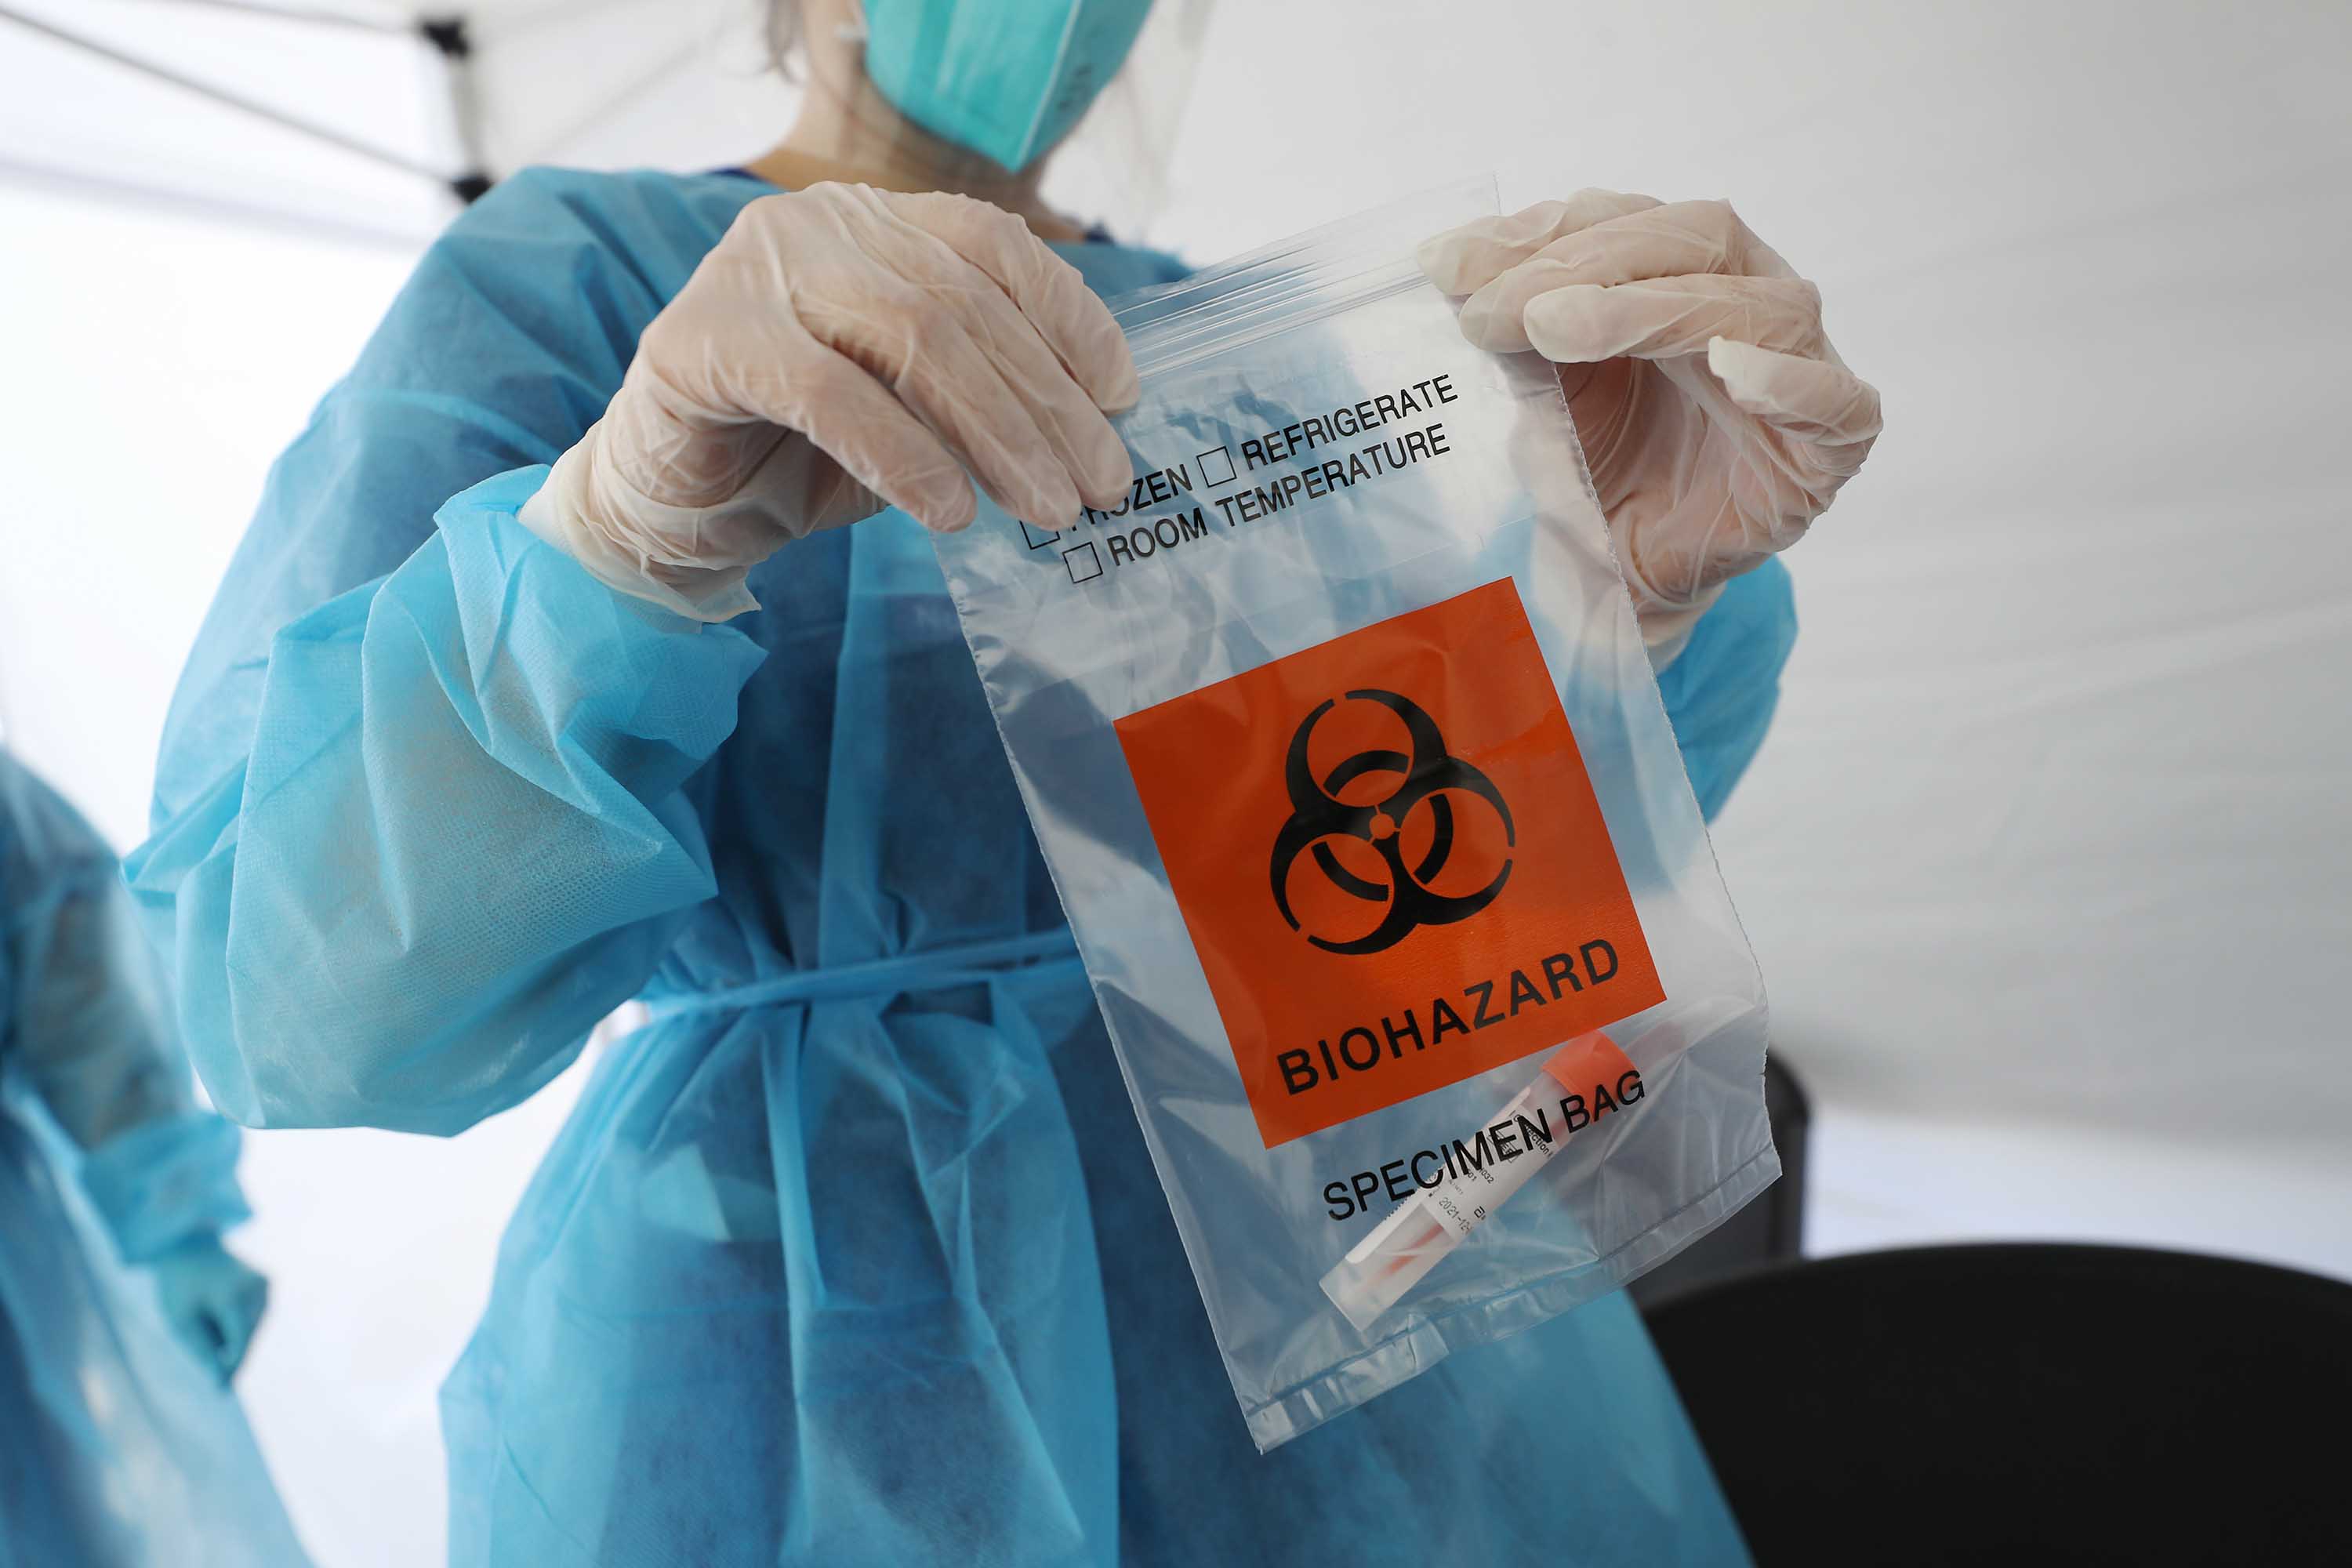 A nurse seals a specimen bag containing a Covid-19 test swab at a mobile clinic set up outside Walker Temple AME Church in Los Angeles, California, on July 15.